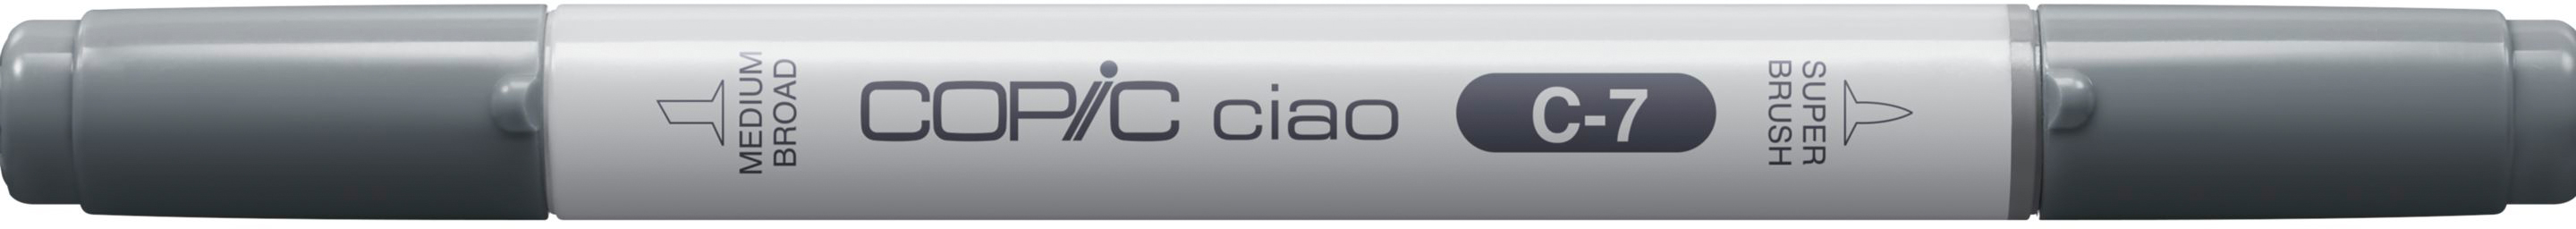 COPIC Marker Ciao 2207515 C-7 - Cool Grey No.7